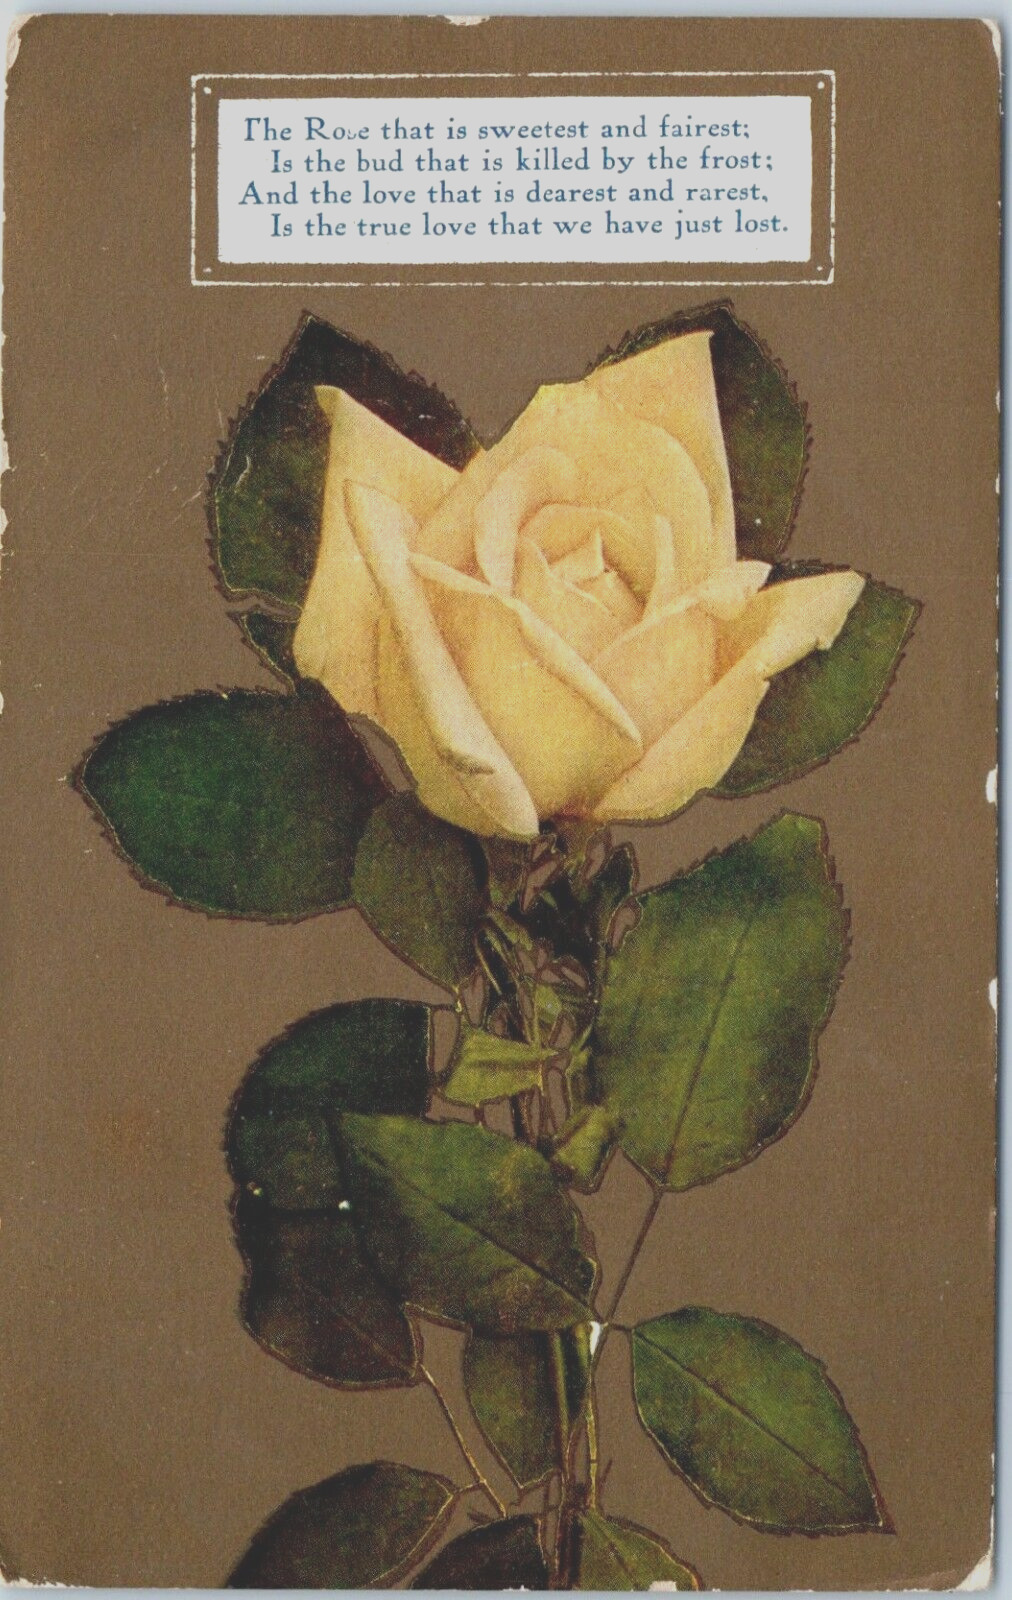 The Rose that is Sweetest and Fairest, Poem Postcard c1910